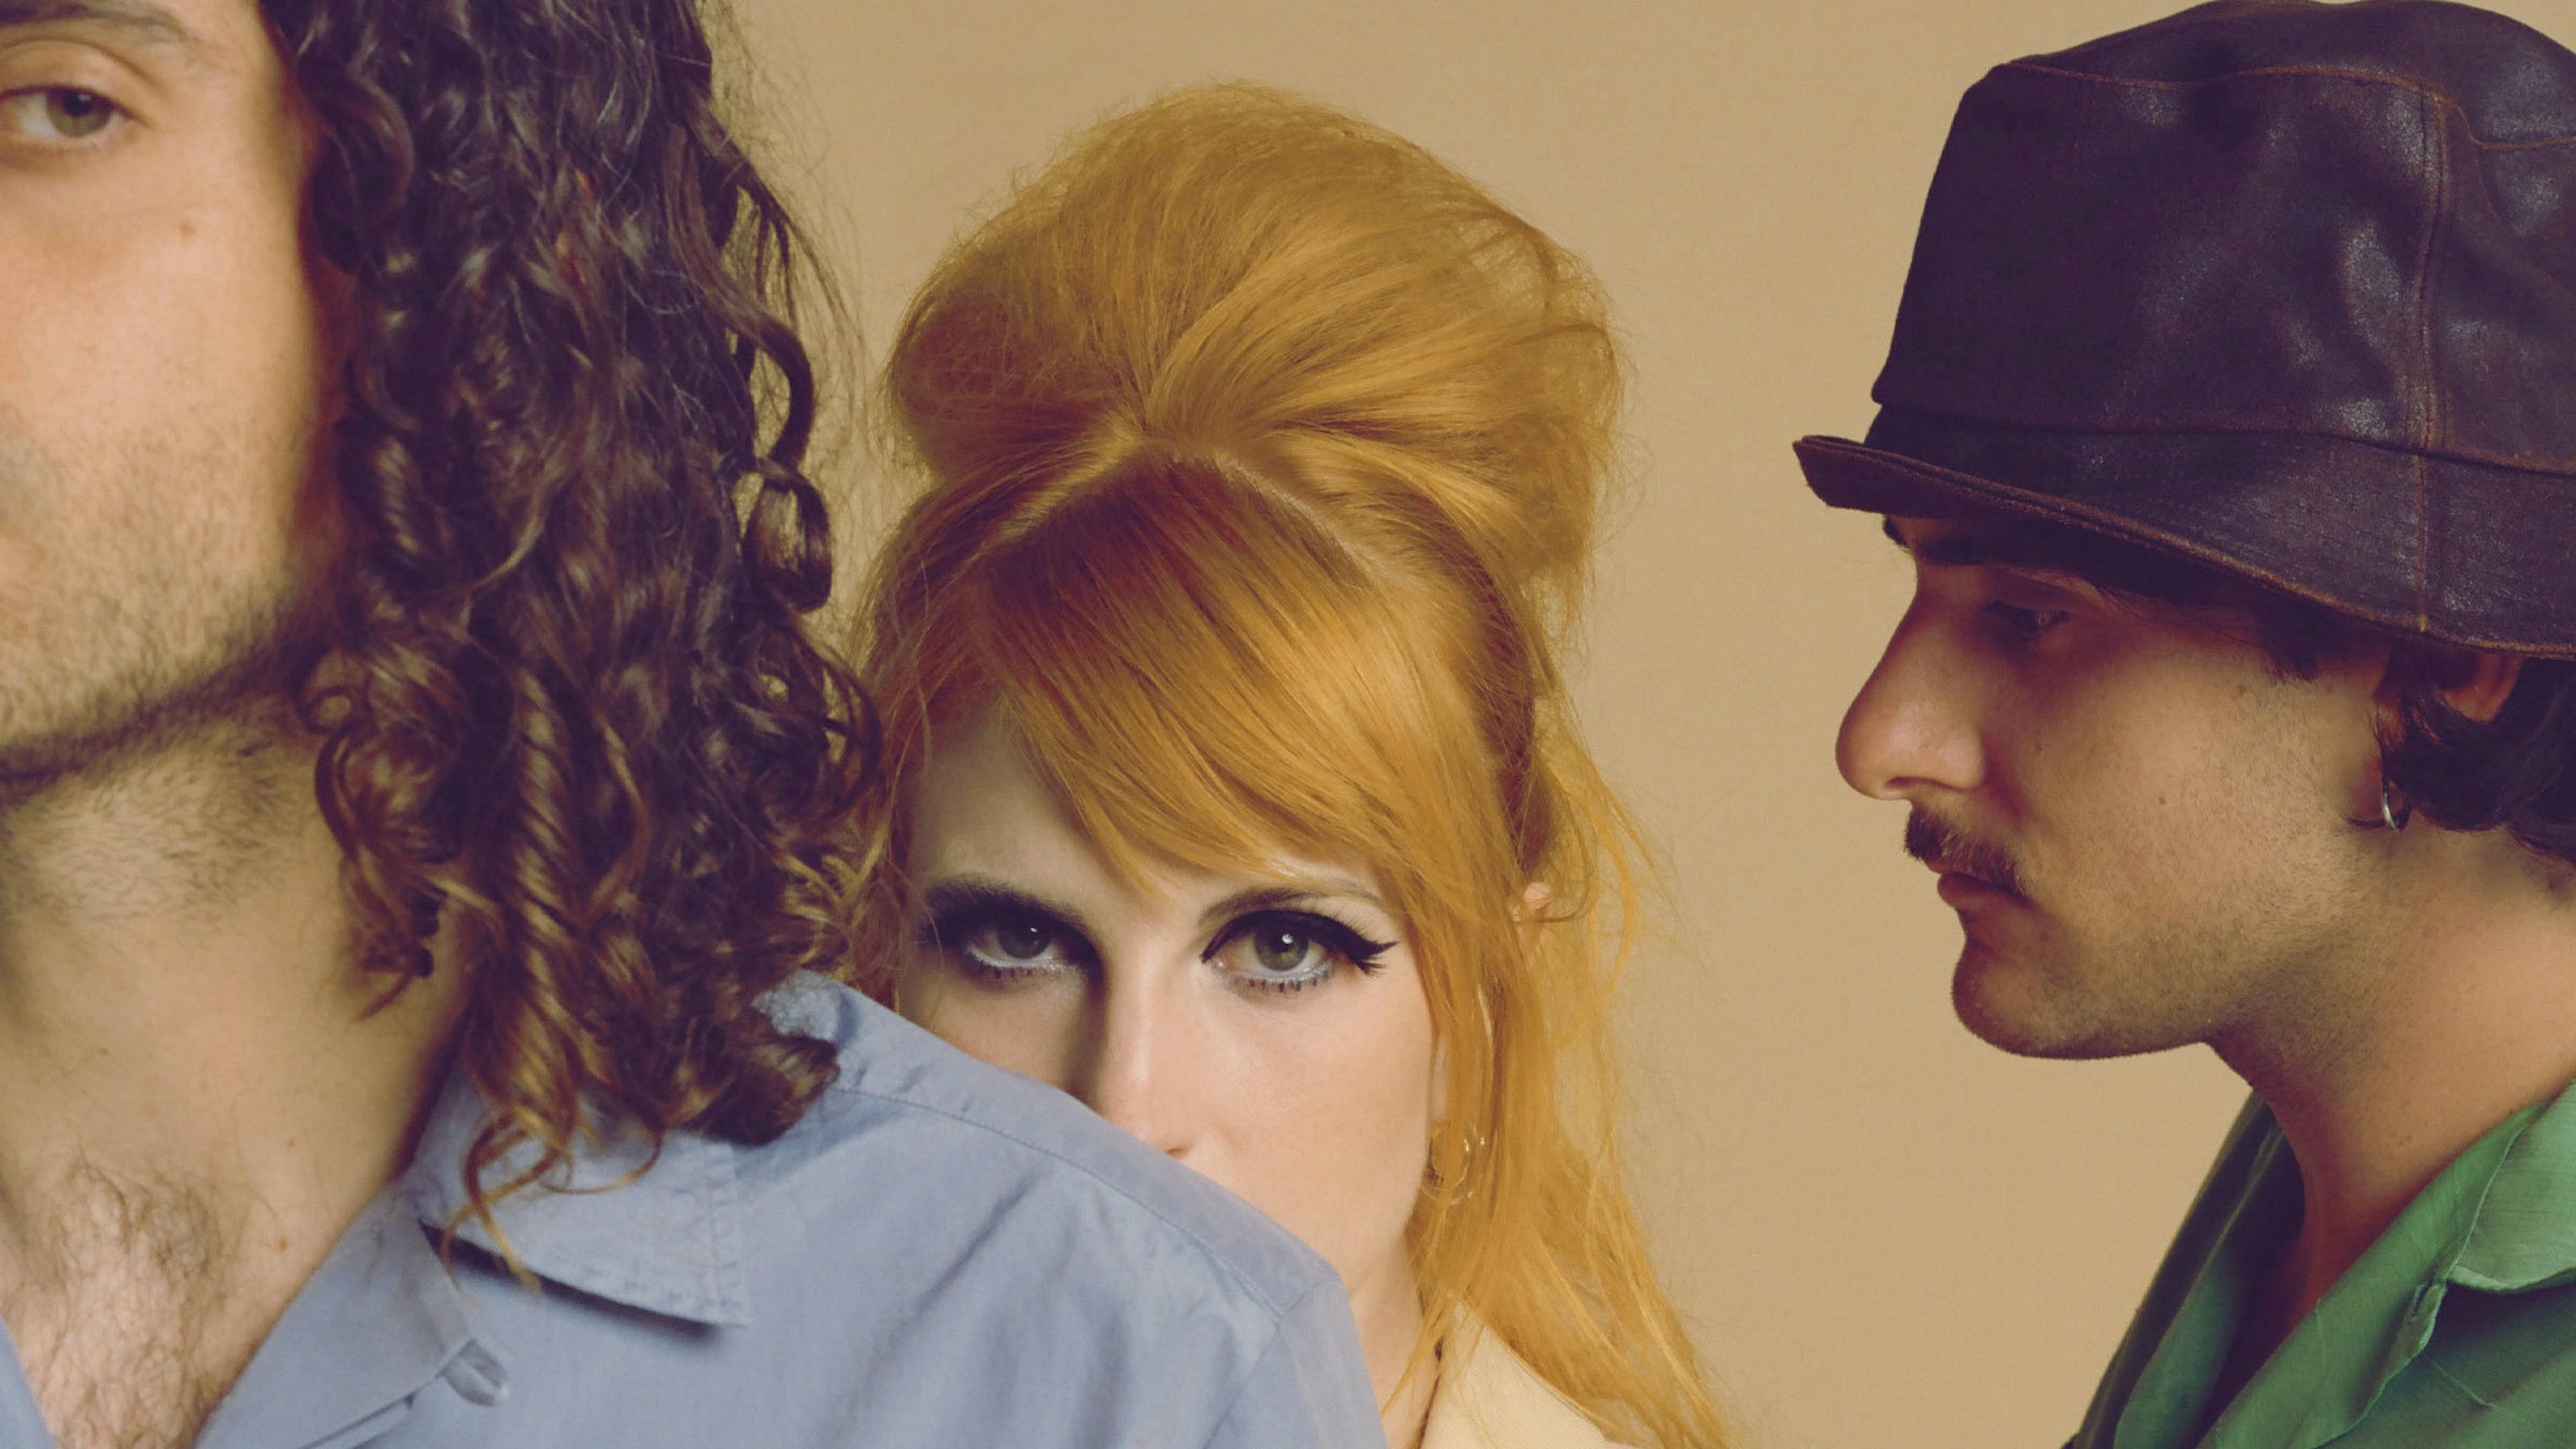 Paramore: “Just like always, whatever we put out next will hopefully surprise people”